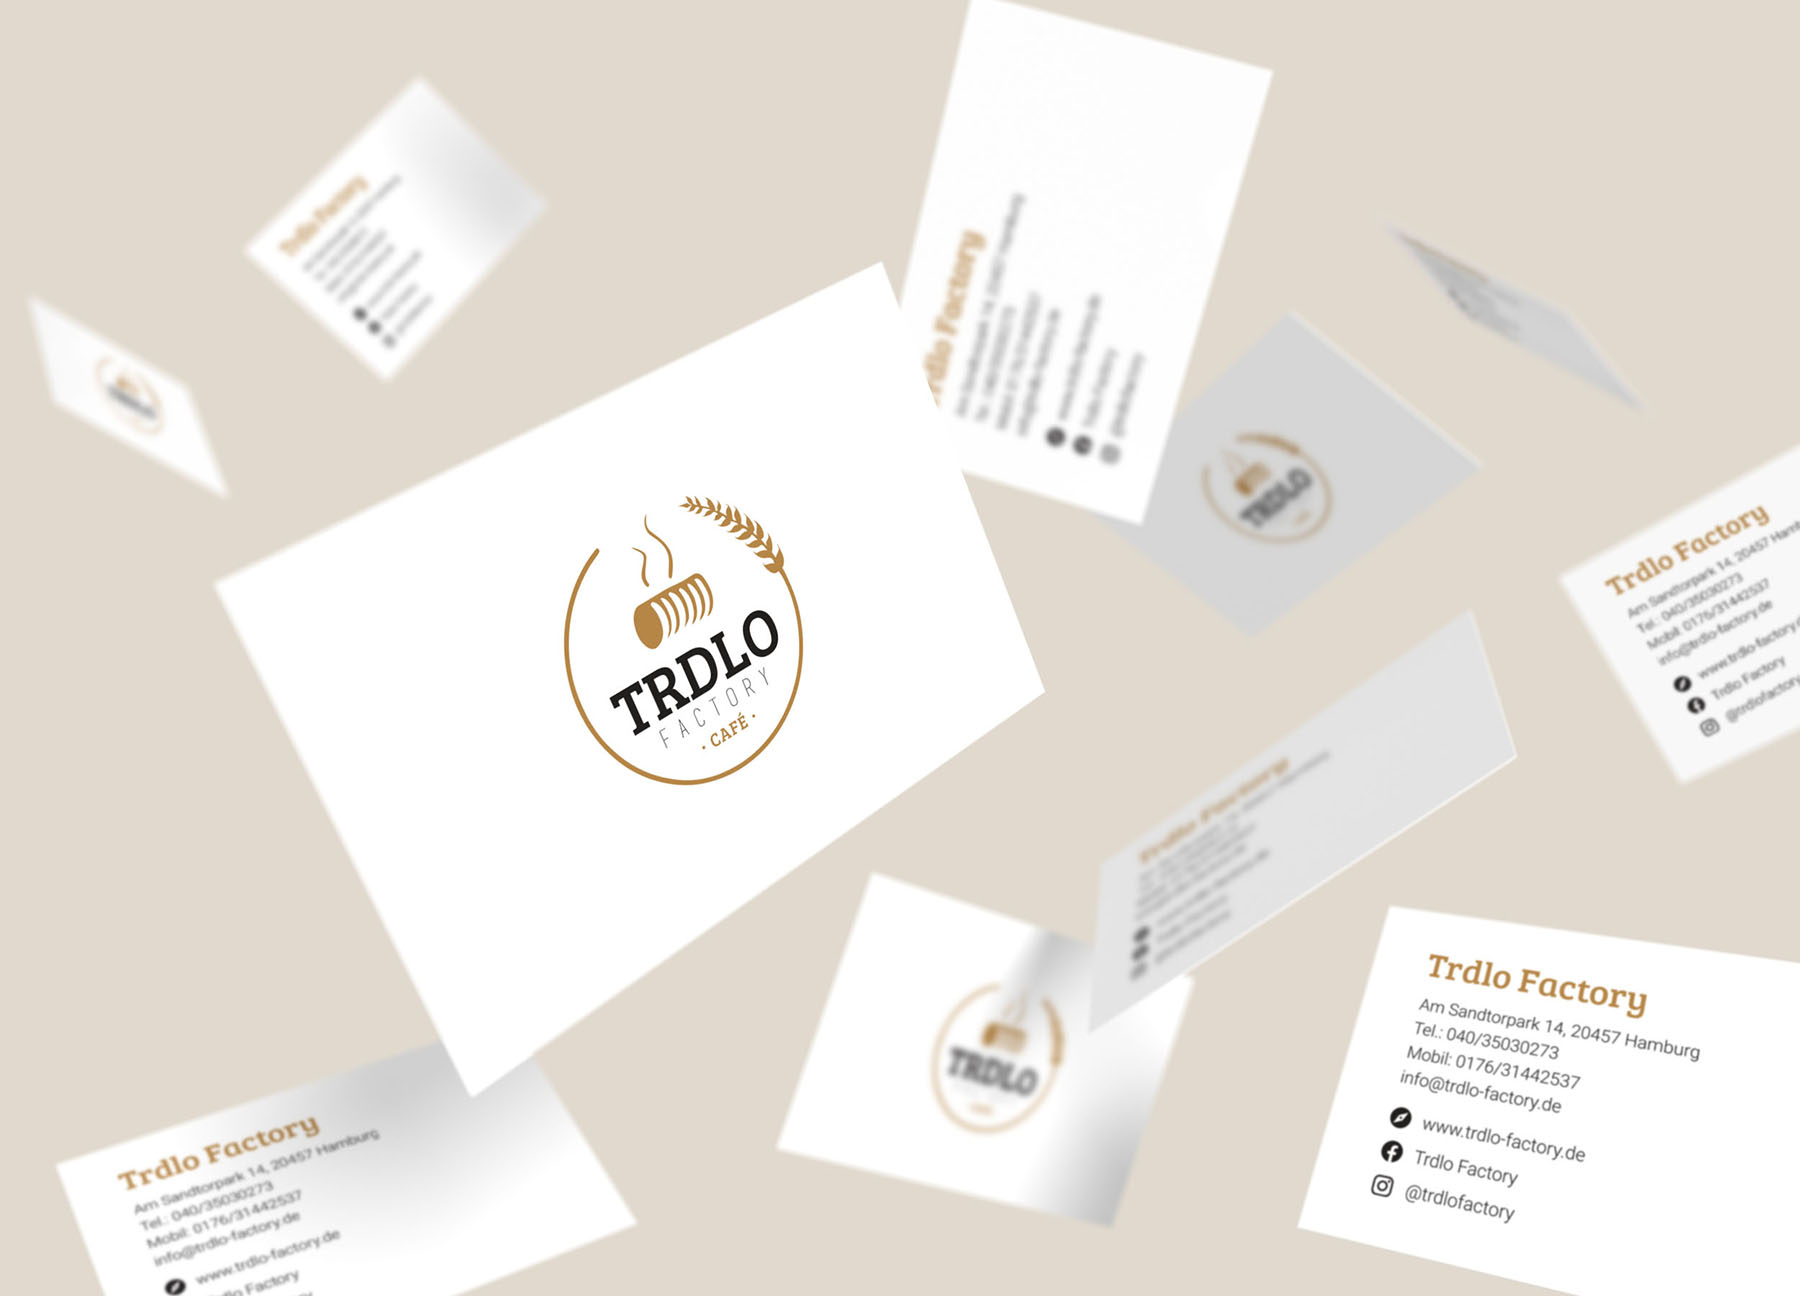 the business cards